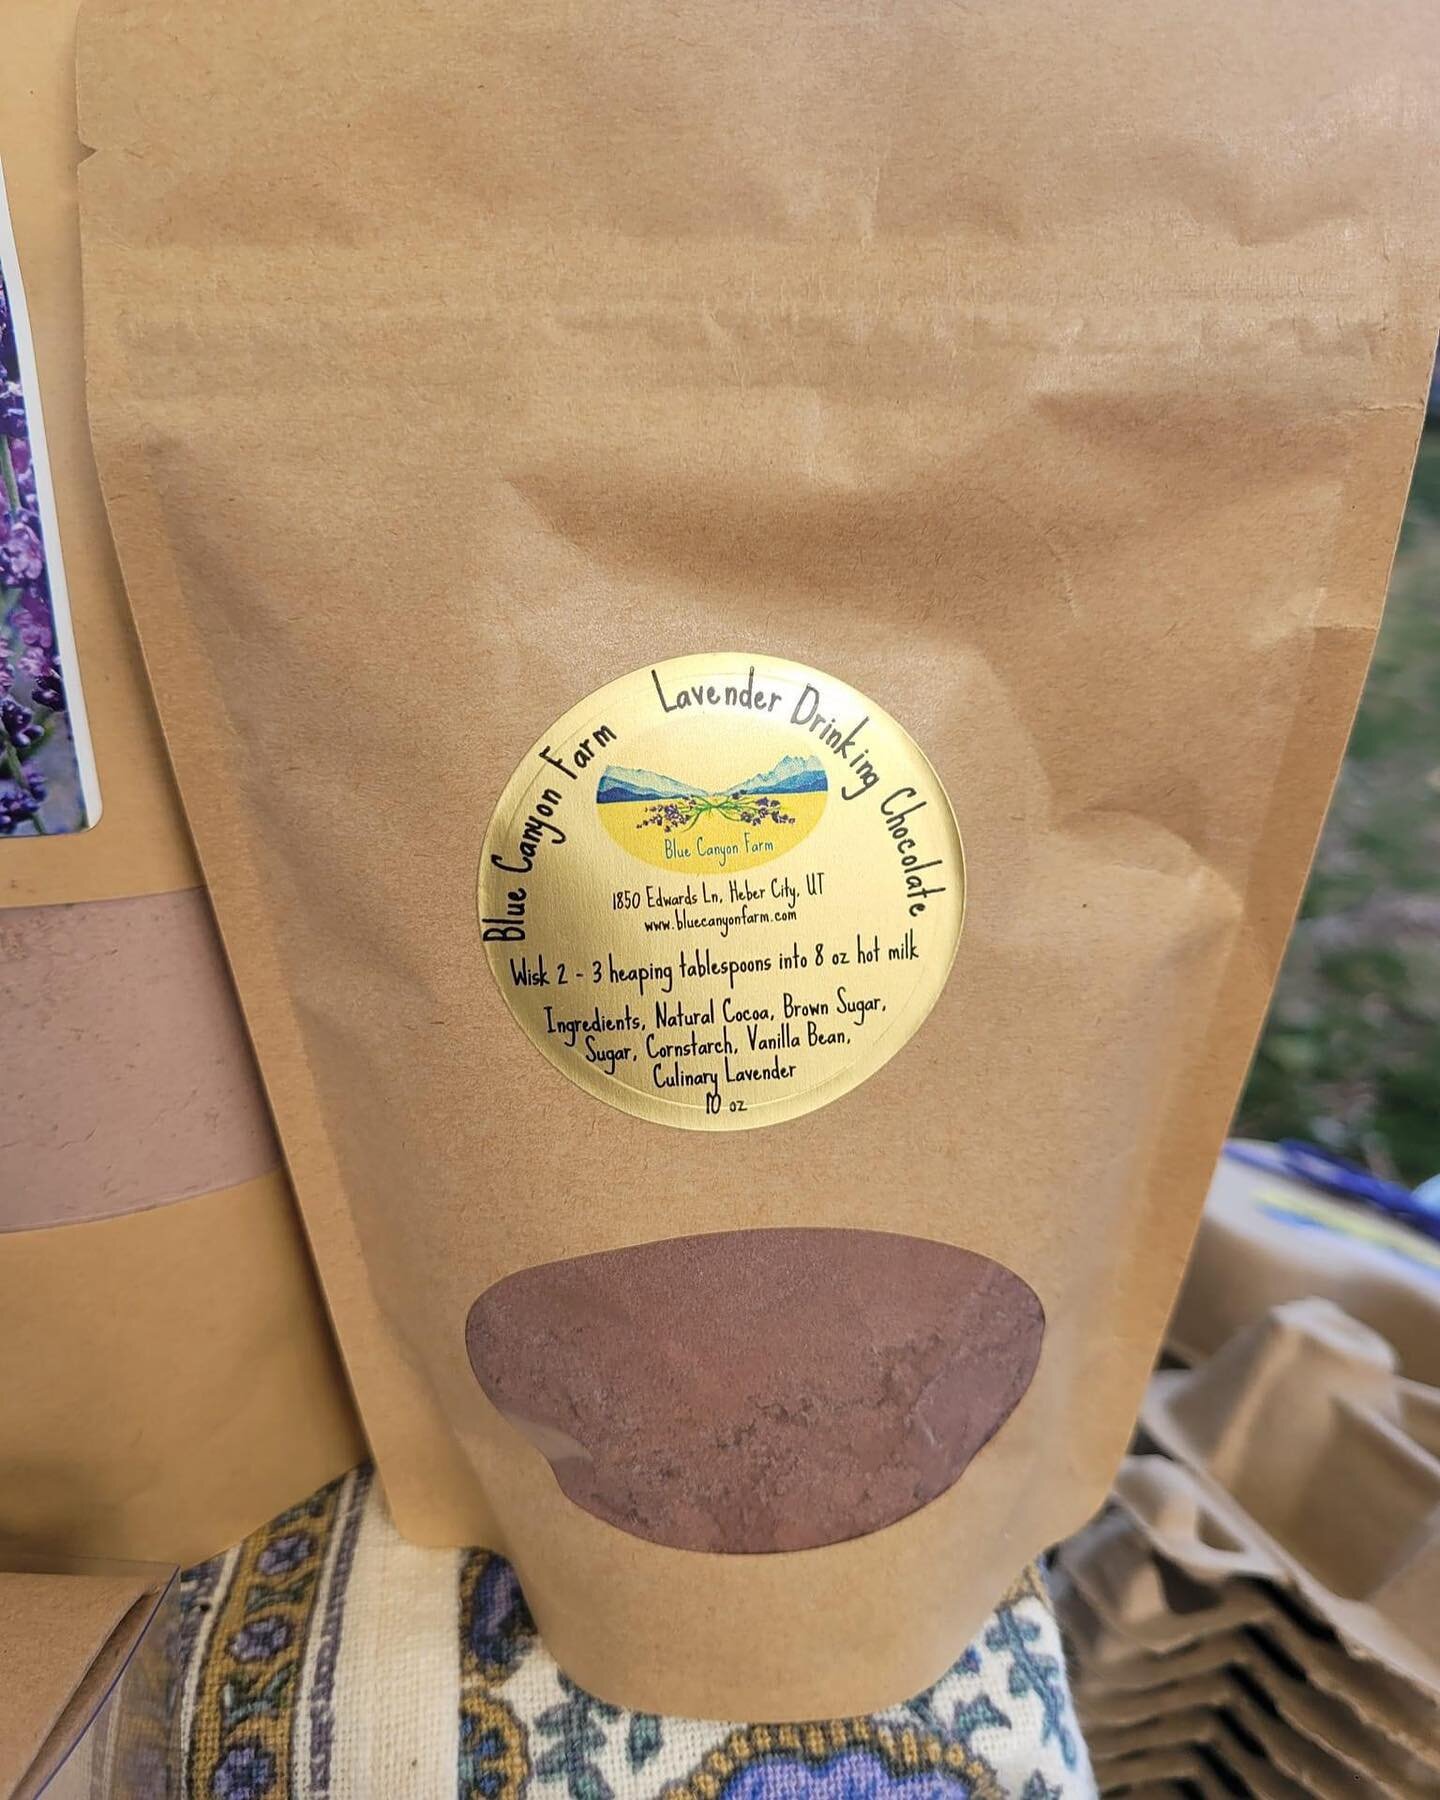 Good mornin folks! We are back at Wheeler Historic Farm this week! There's a chill in the air, make sure to grab your lavender hot chocolate and a pair of our lavender hand warmers! We are here until 1:00!